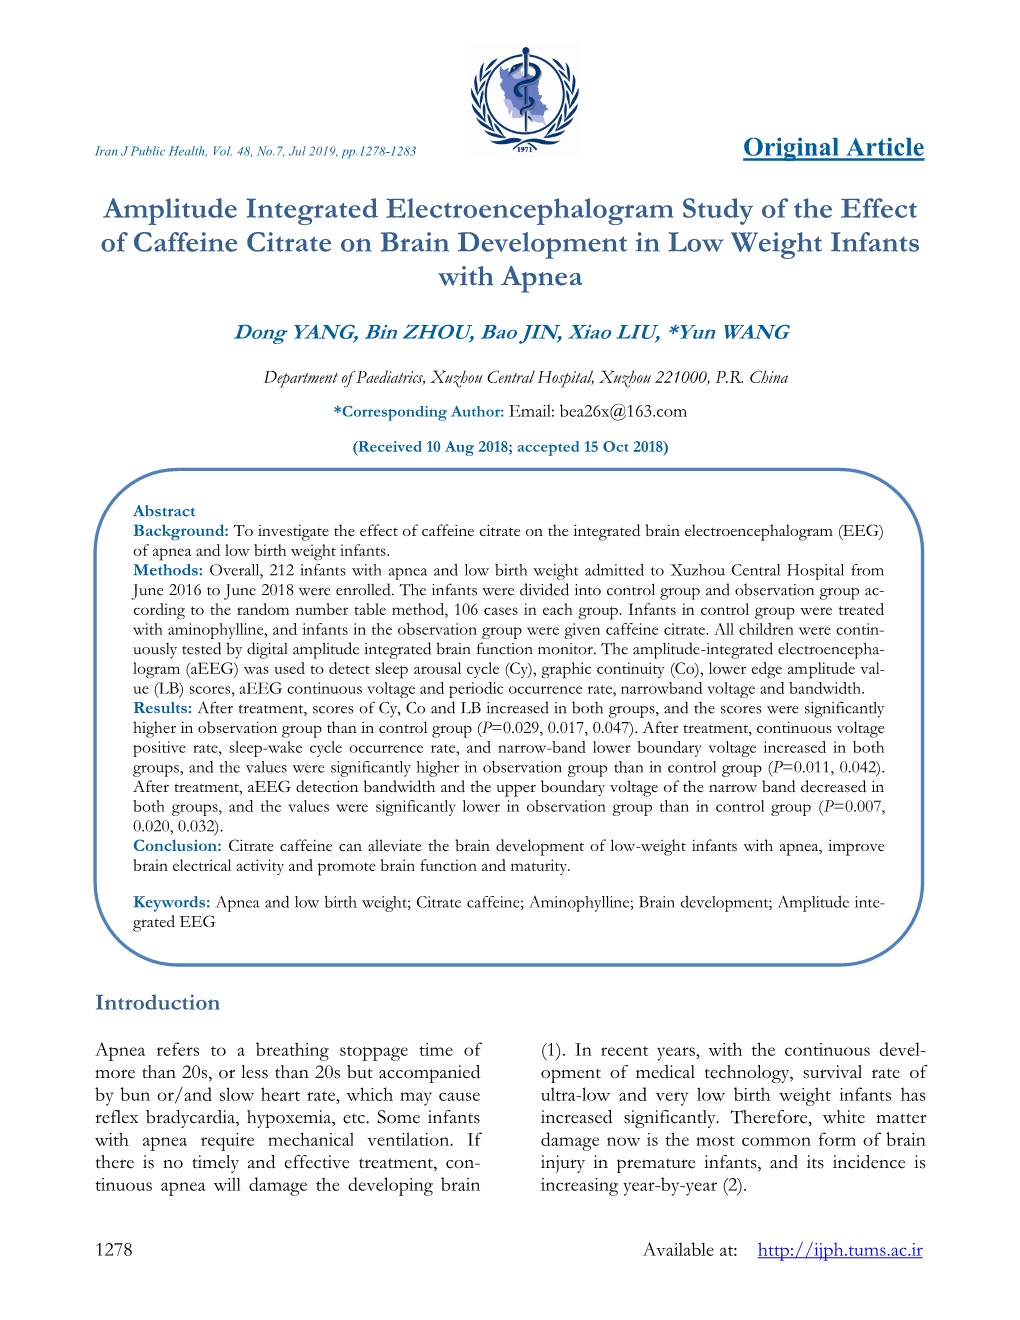 Amplitude Integrated Electroencephalogram Study of the Effect of Caffeine Citrate on Brain Development in Low Weight Infants with Apnea